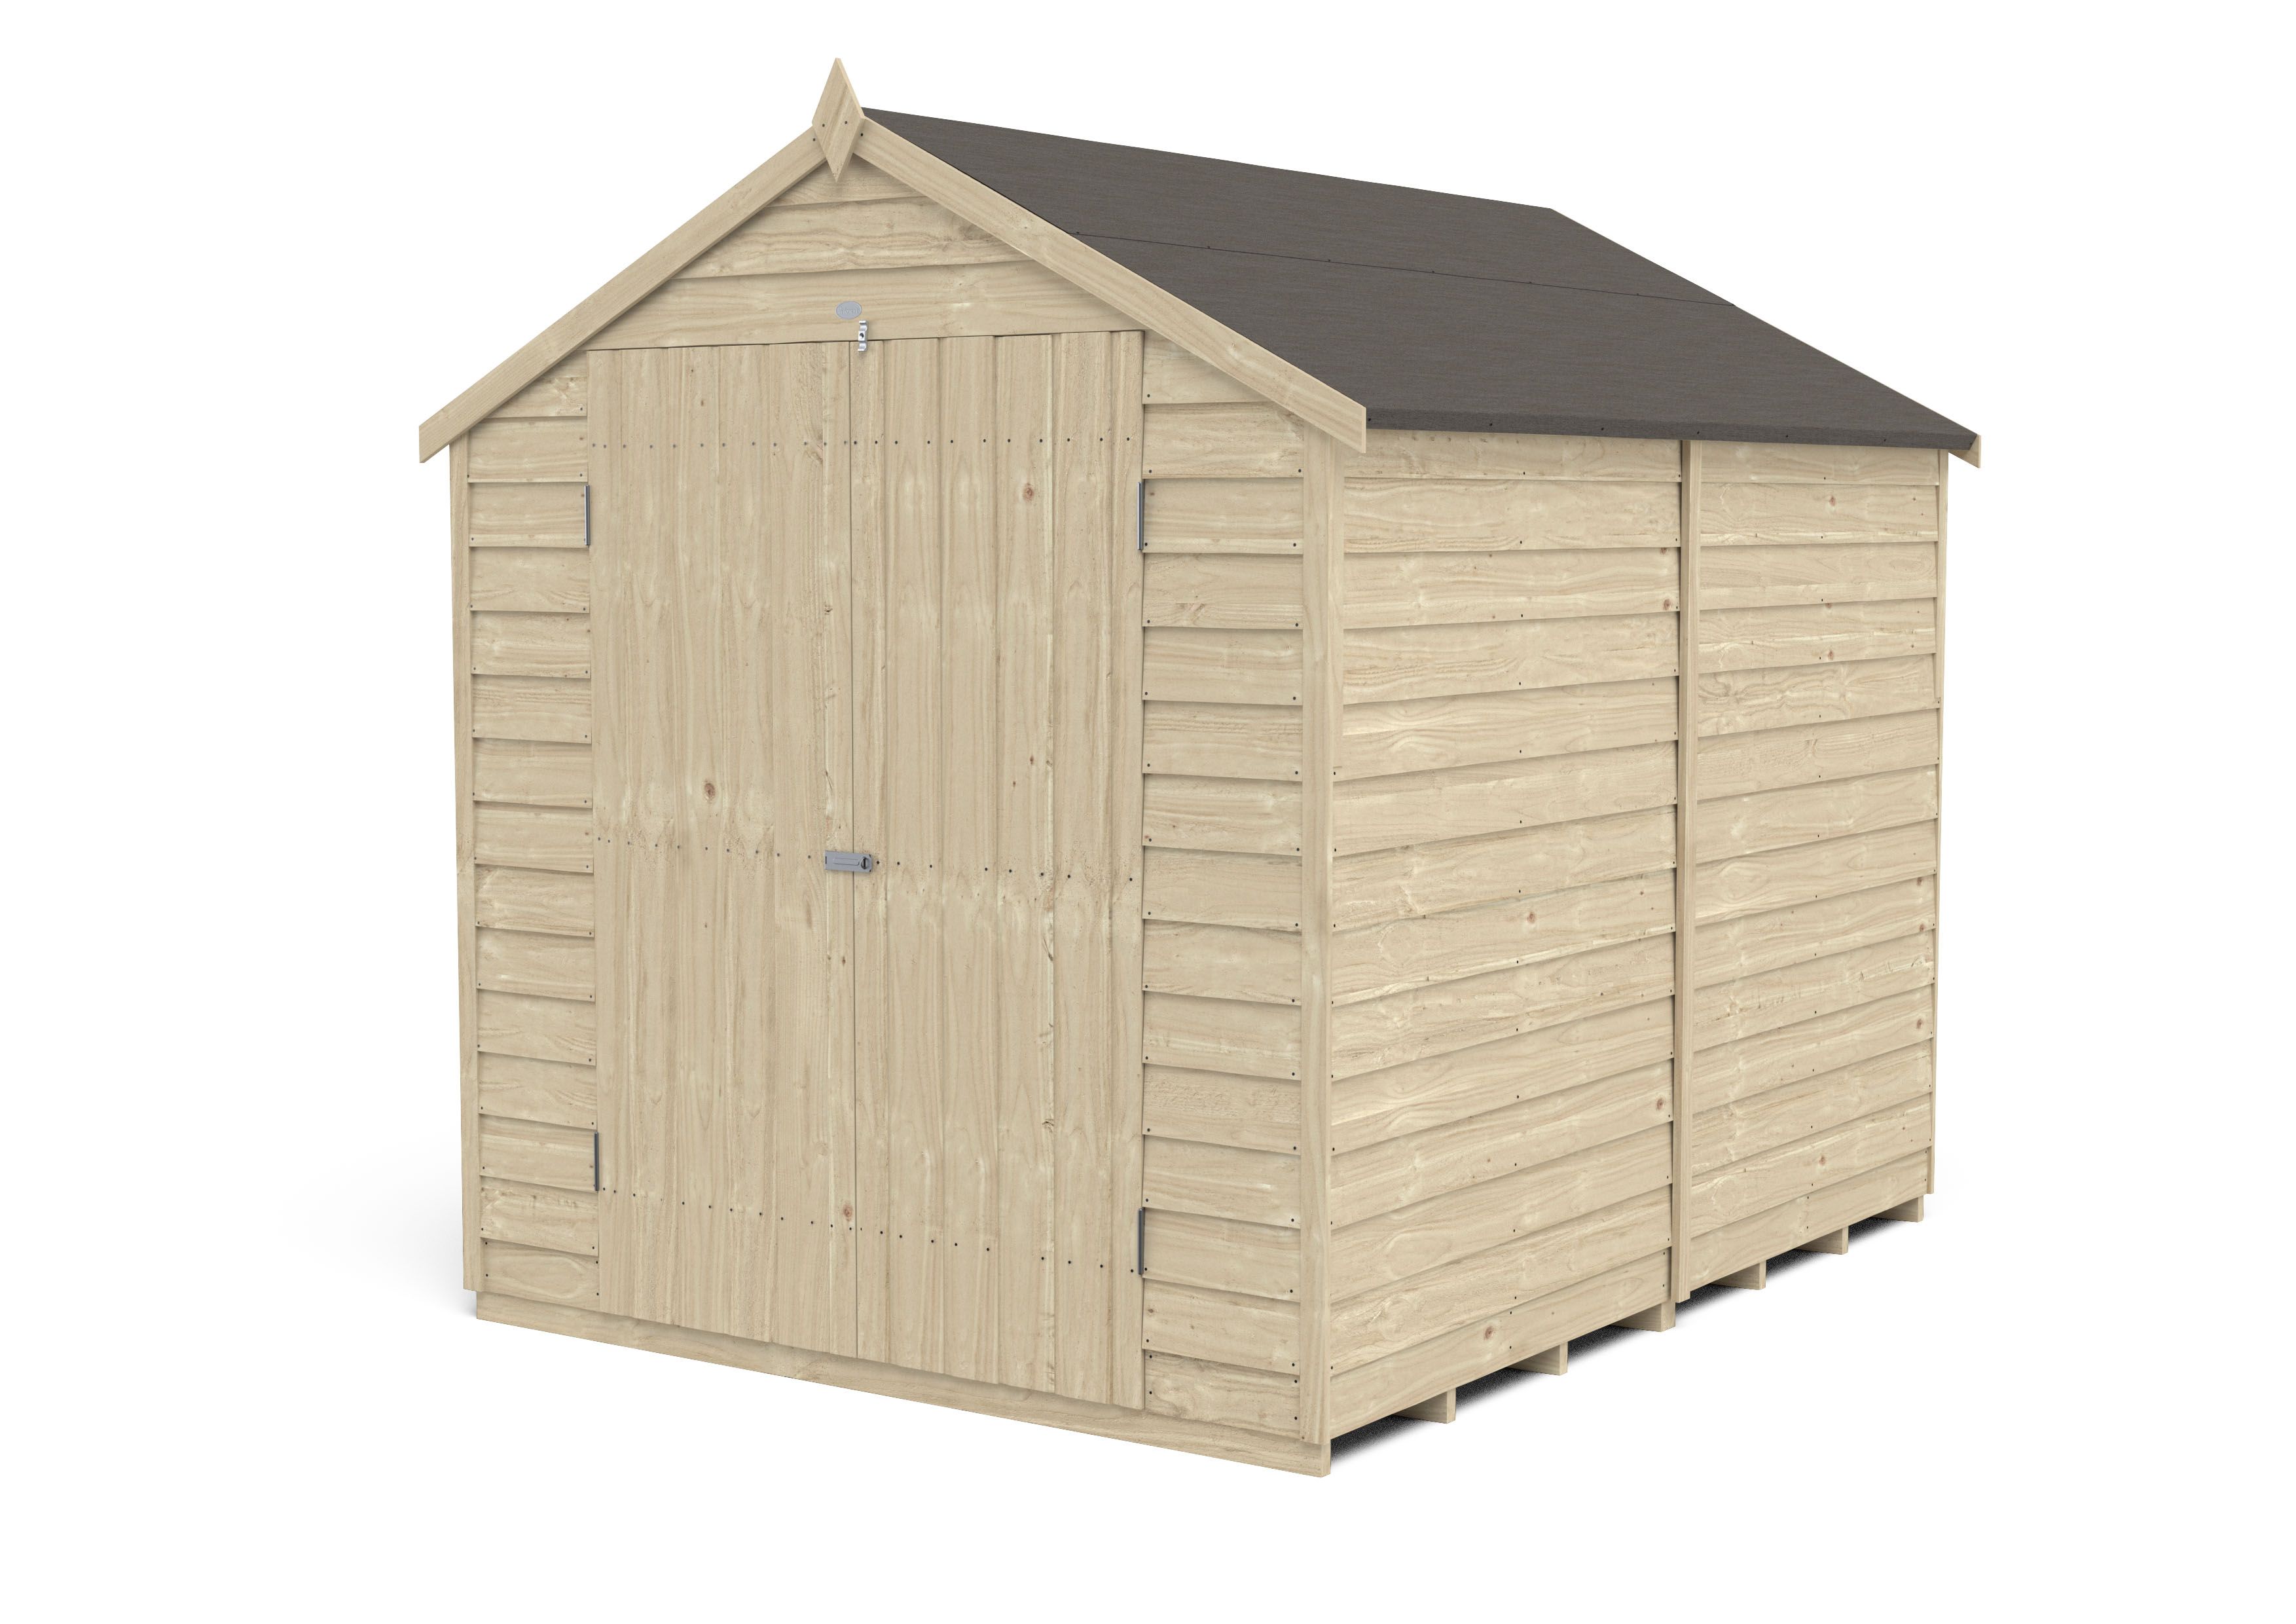 Forest Garden 8x6 ft Apex Wooden 2 door Shed with floor (Base included) - Assembly service included